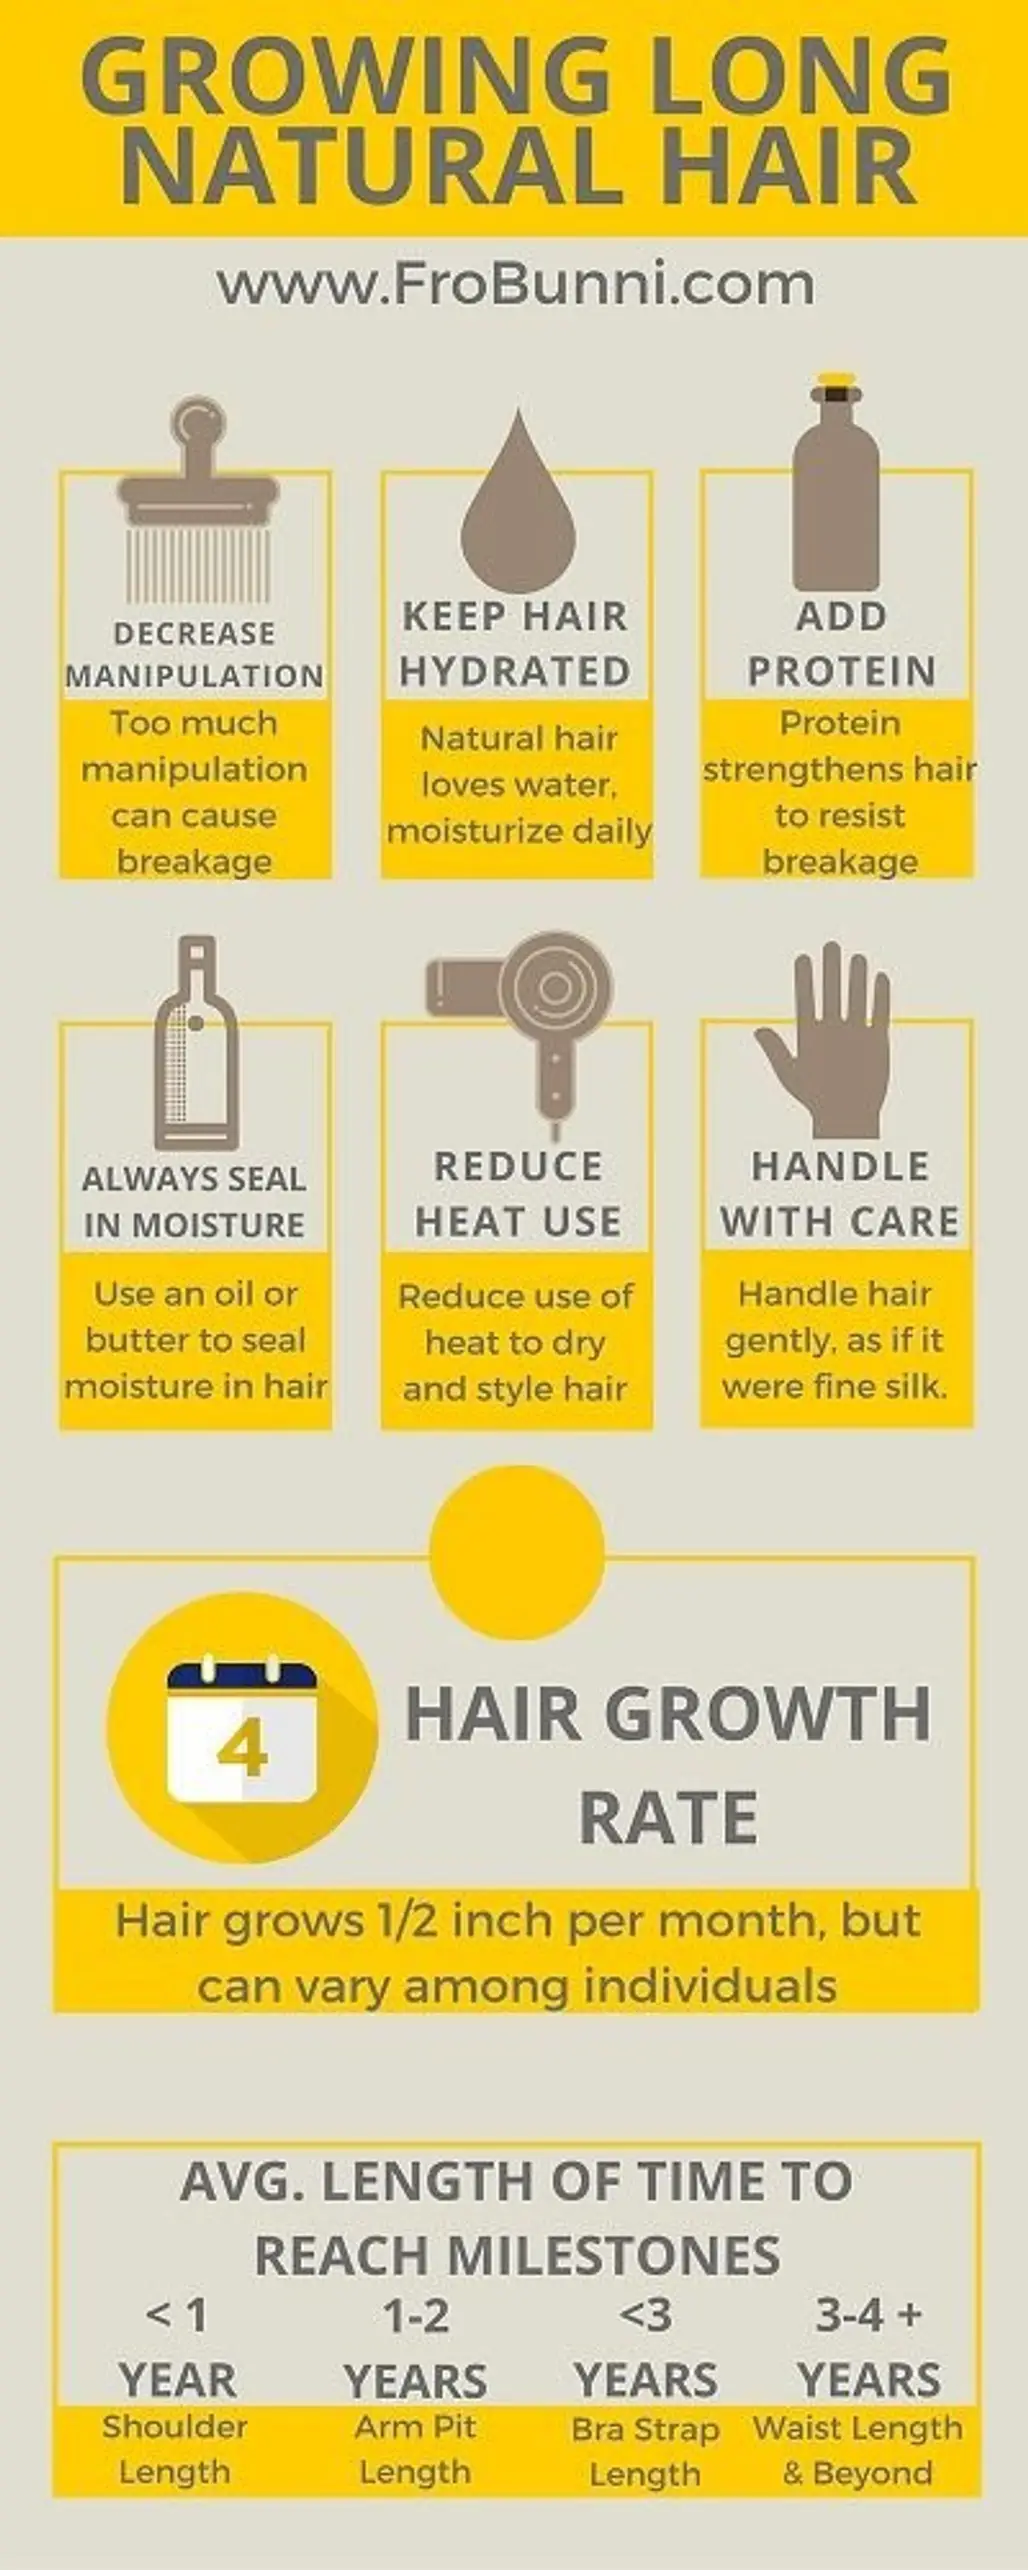 Tips for Growing Long Natural Hair